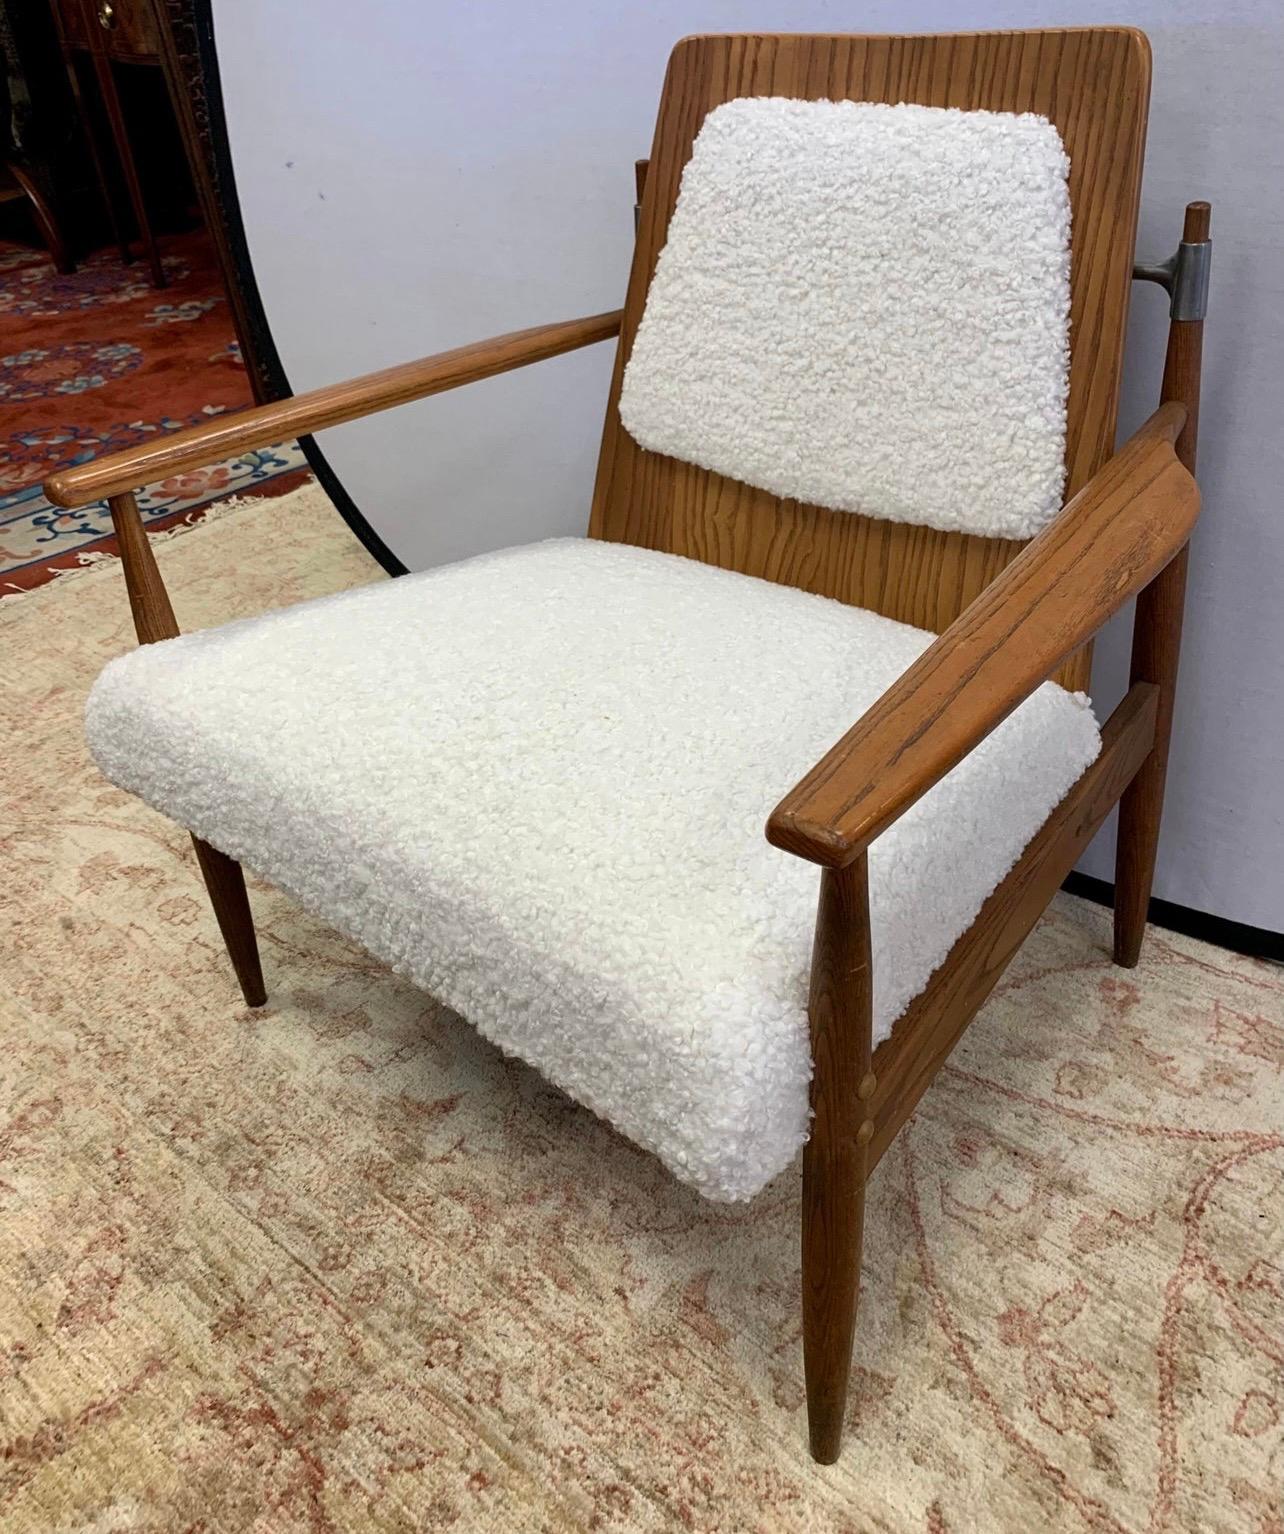 Vintage 1960s Mid-Century Modern teak lounge chair which has been newly reupholstered in boucle fabric which looks like a faux shearling. Sits beautifully and has lines to die for. Featured in Architectural Digest in 2019. Own the best.